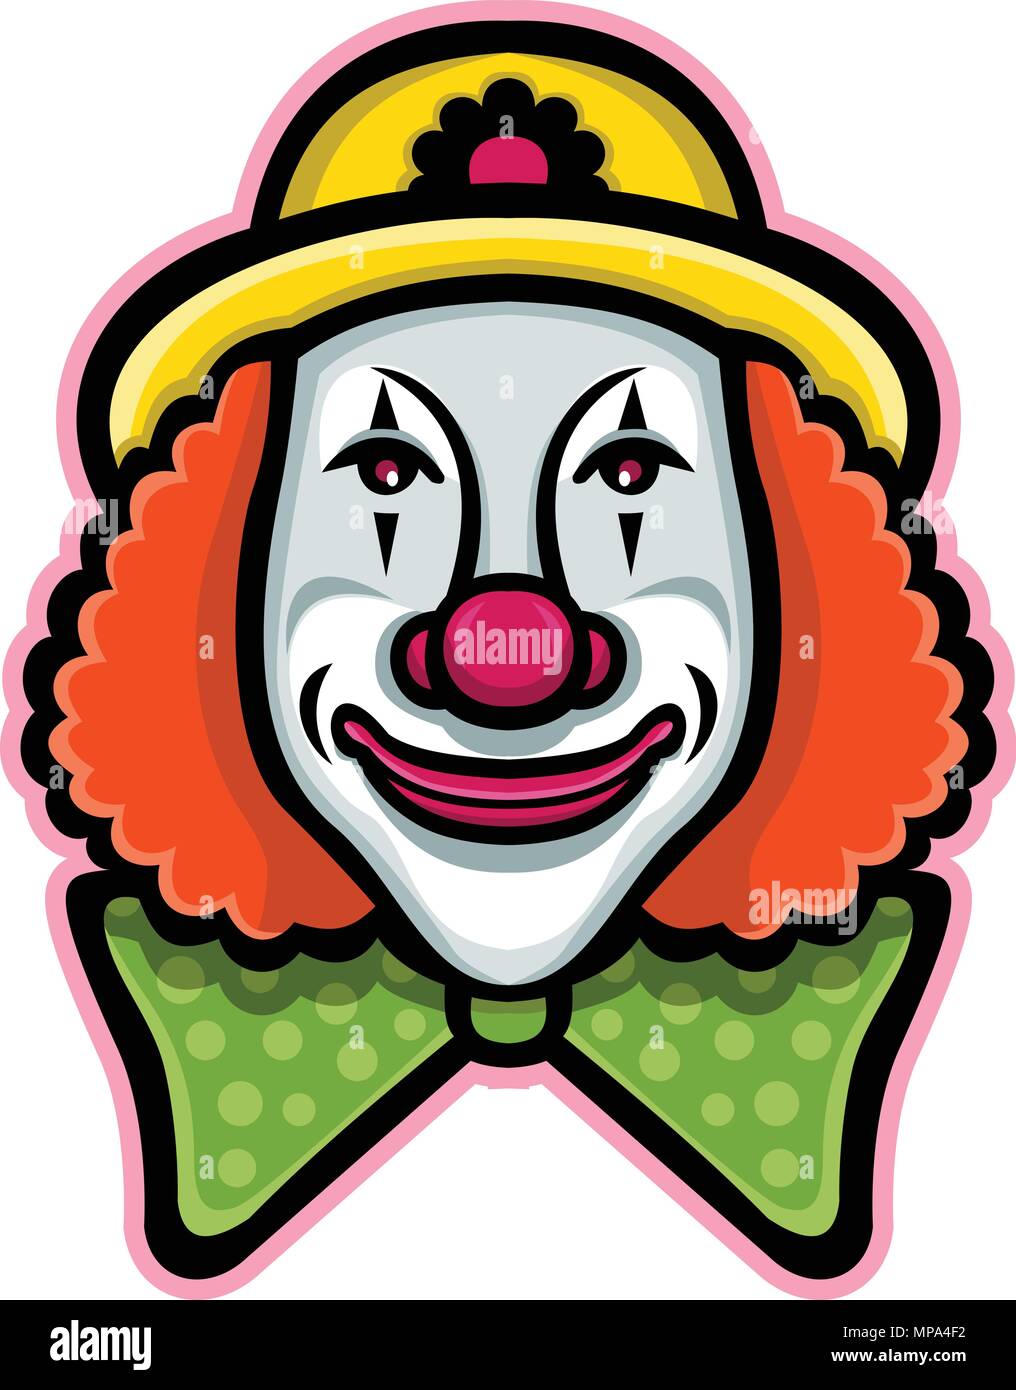 Mascot icon illustration of head of a vintage whiteface circus clown viewed from front  on isolated background in retro style. Stock Vector